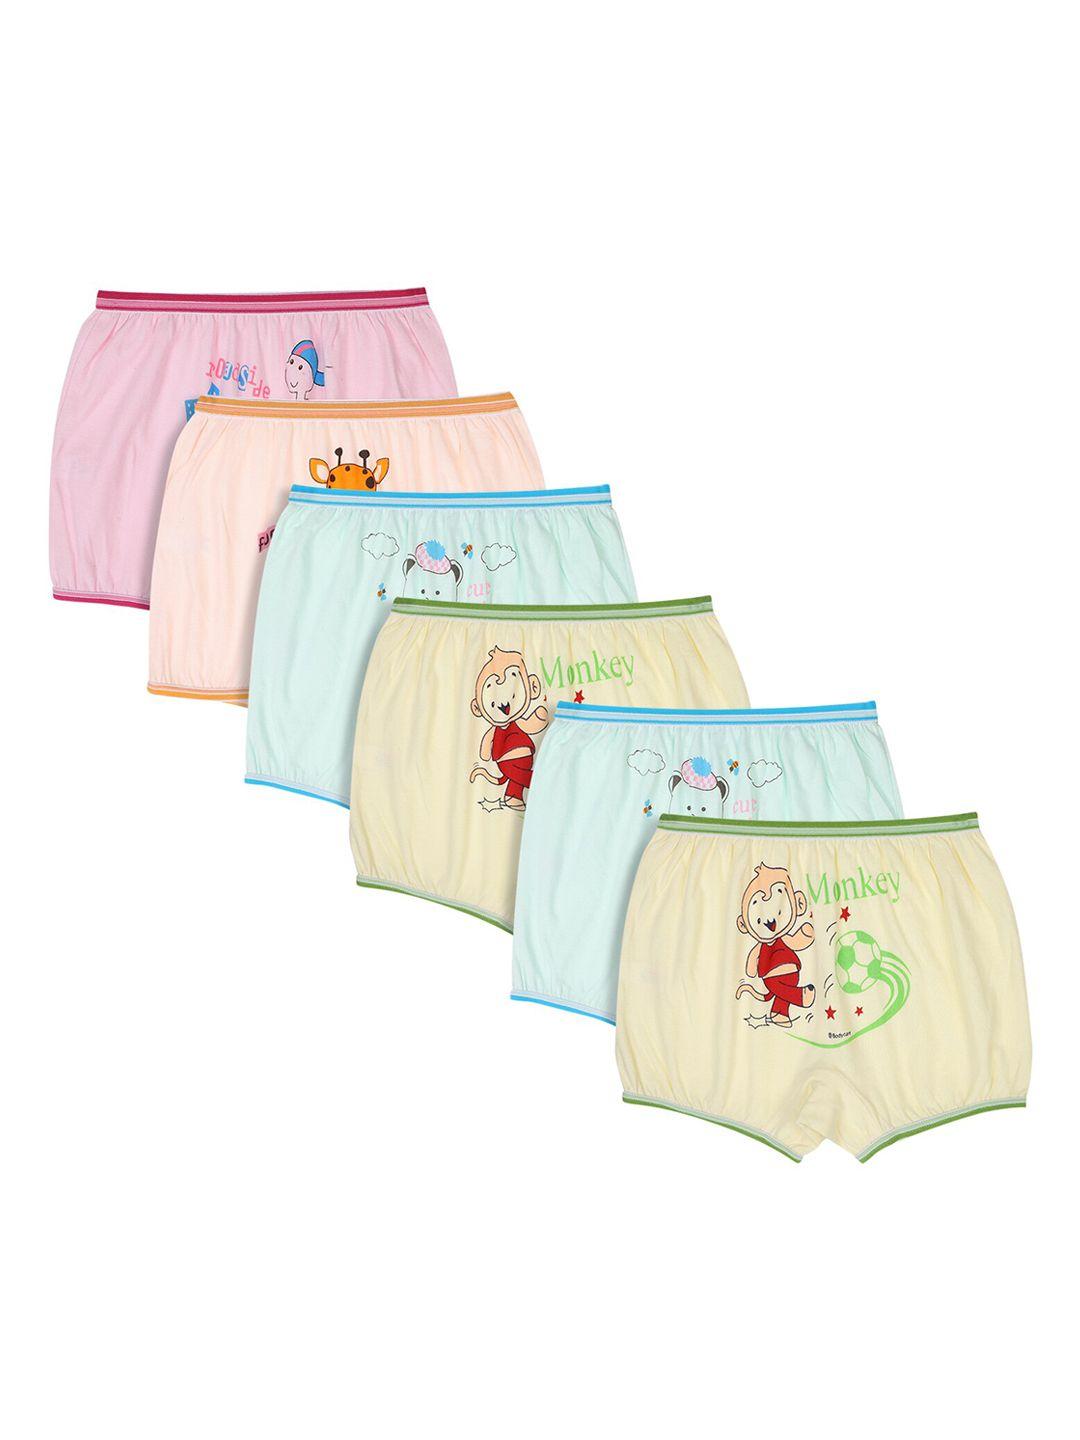 bodycare kids pack of 6 cotton basic briefs